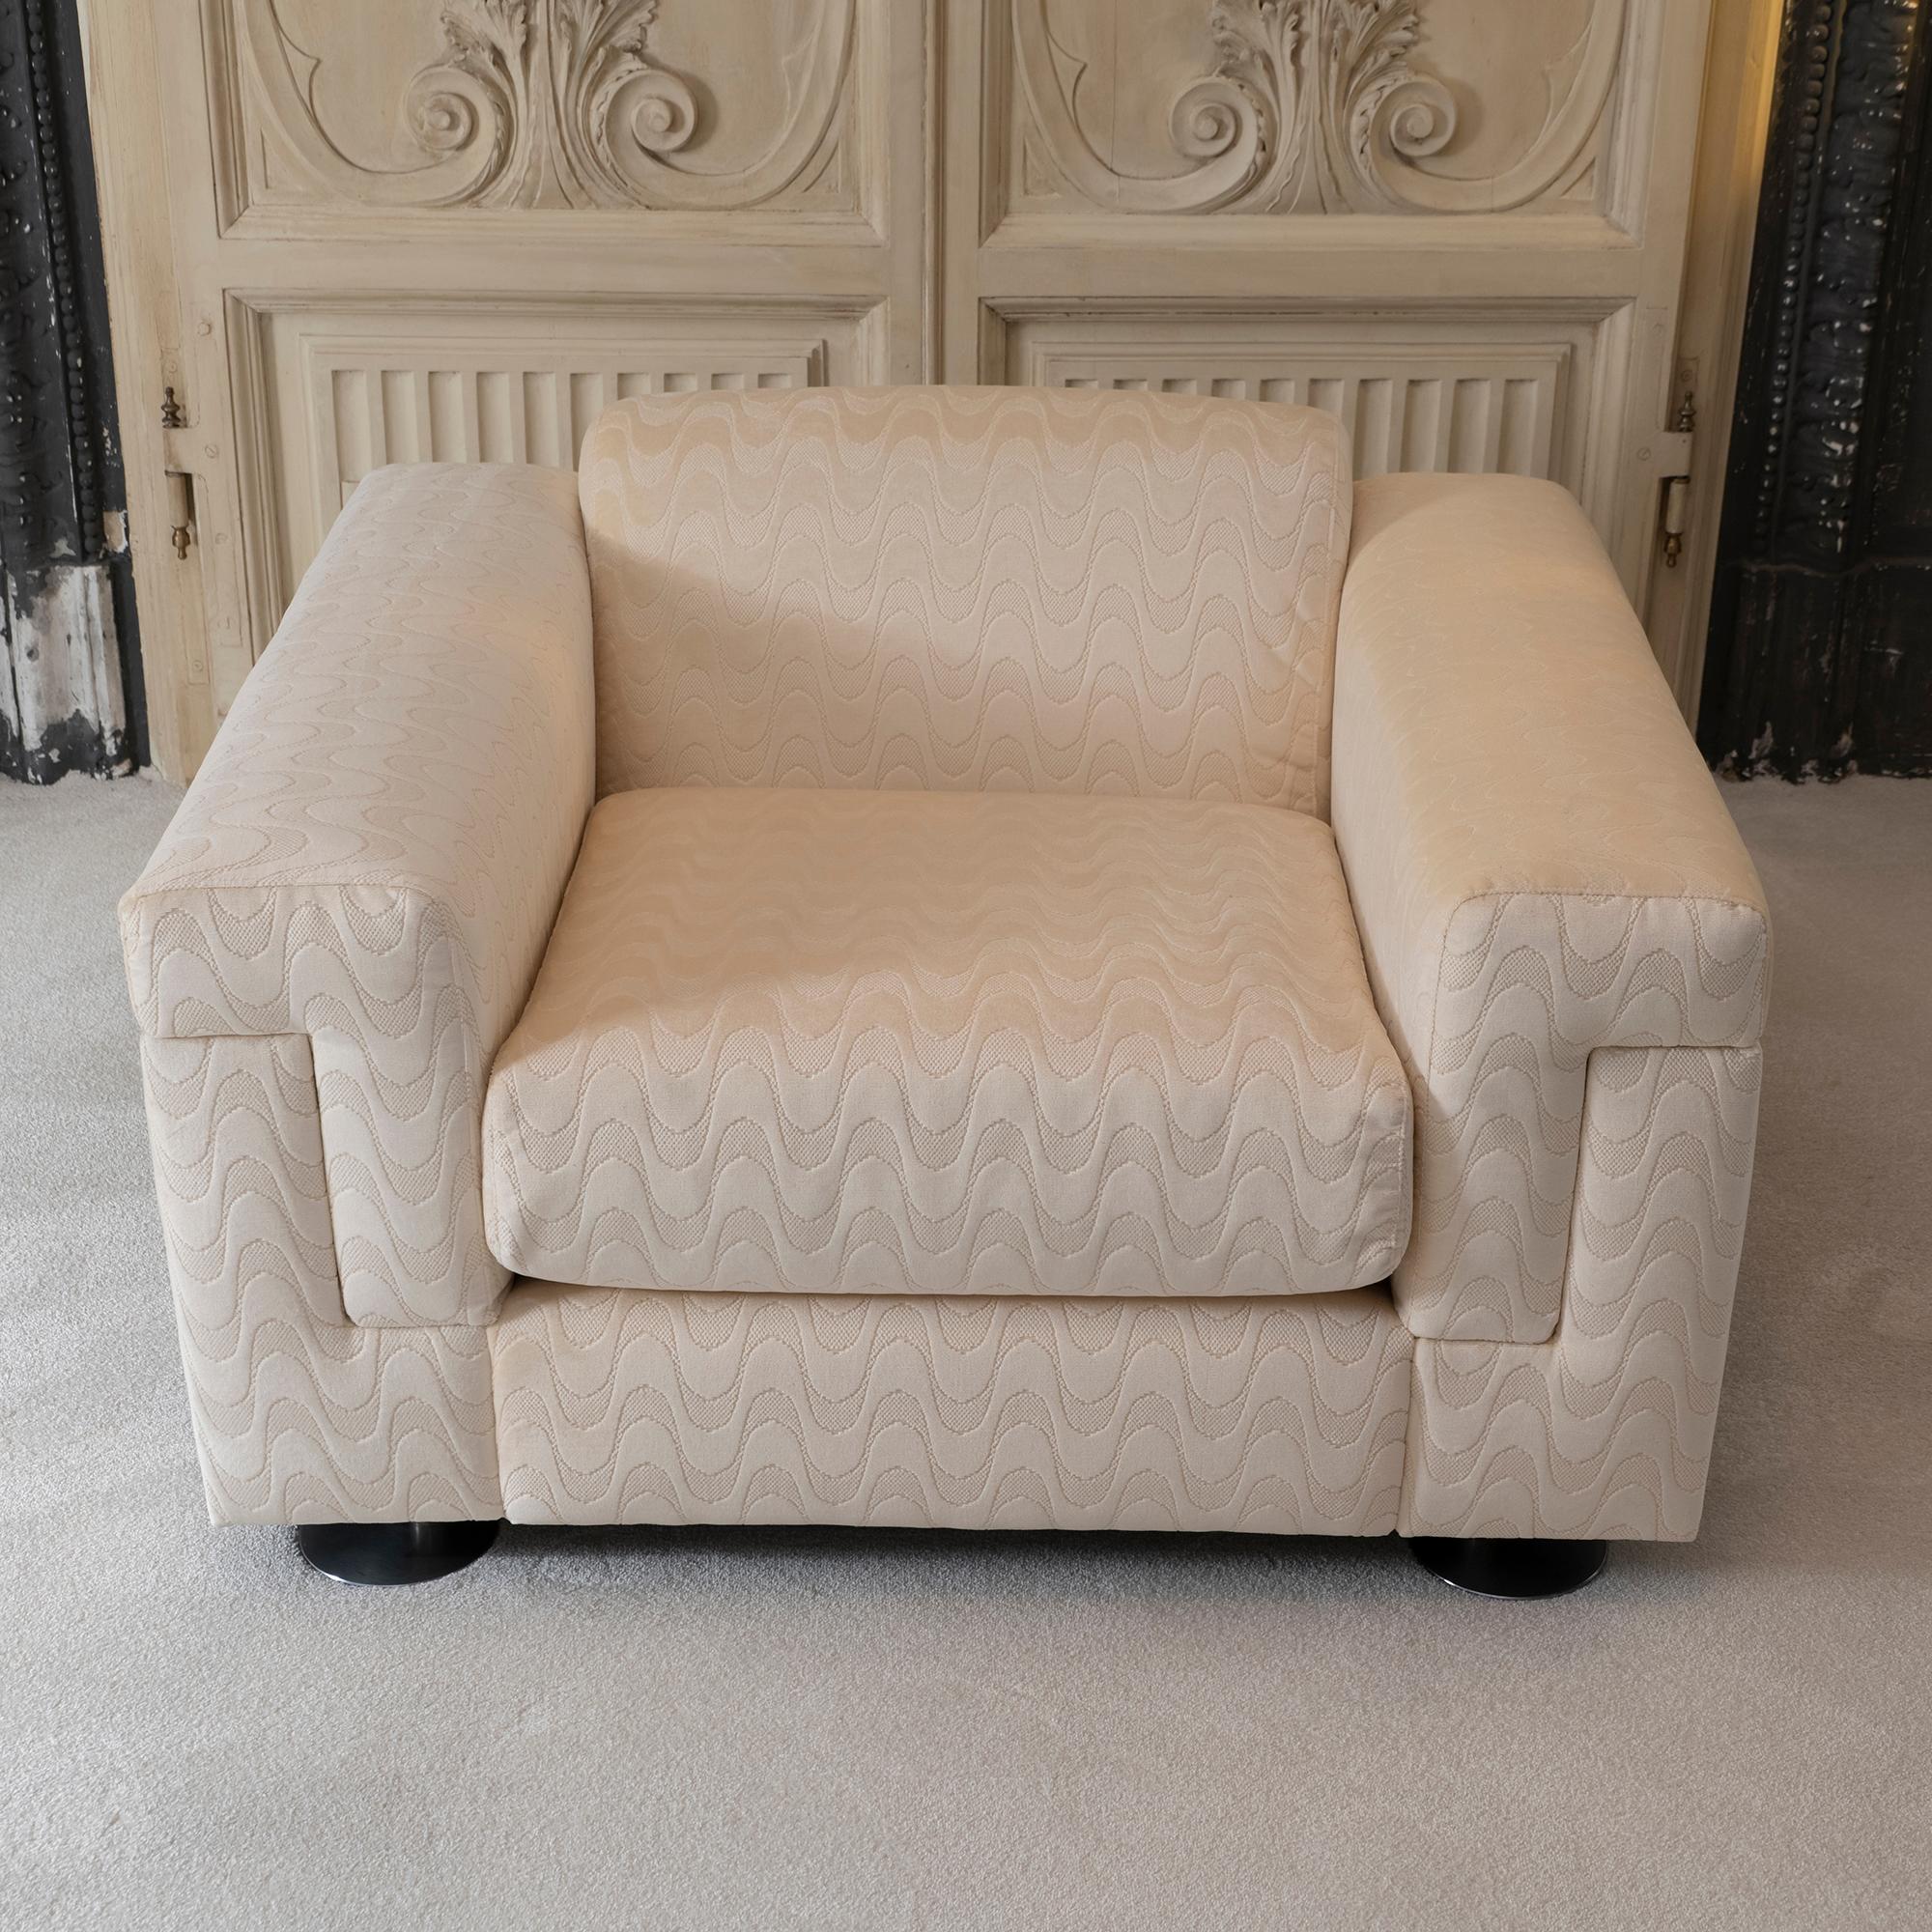 Pair of P120 Armchairs by Tecno, Ivory Woven Velvet, Italy, 1966 In Good Condition For Sale In Firenze, IT